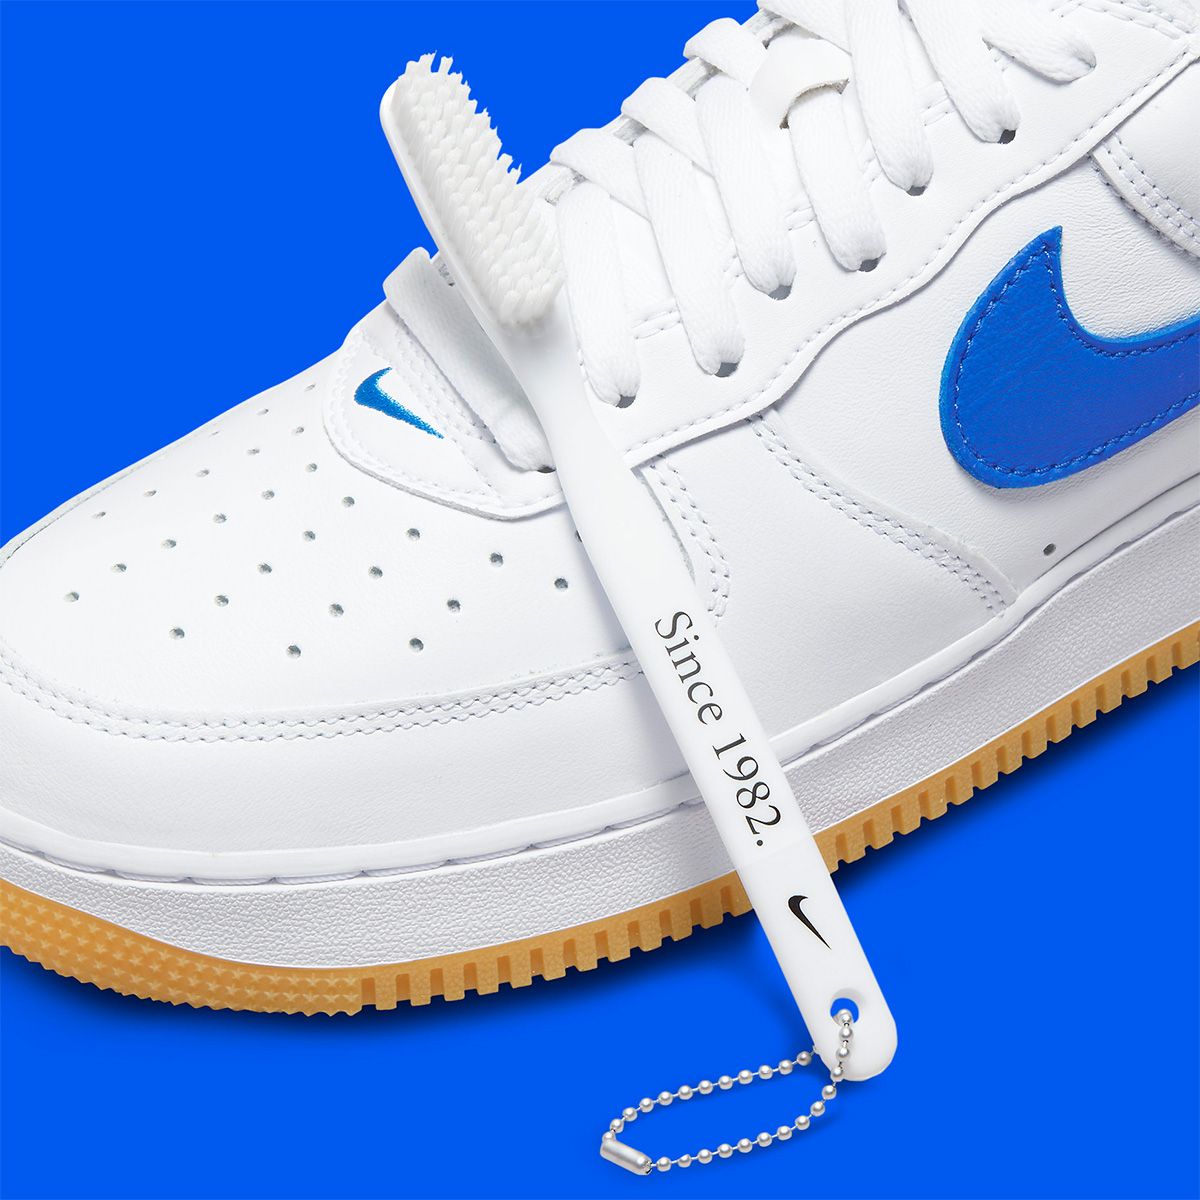 Where to Buy the Nike Air Force 1 Low “Since '82” | HOUSE OF HEAT